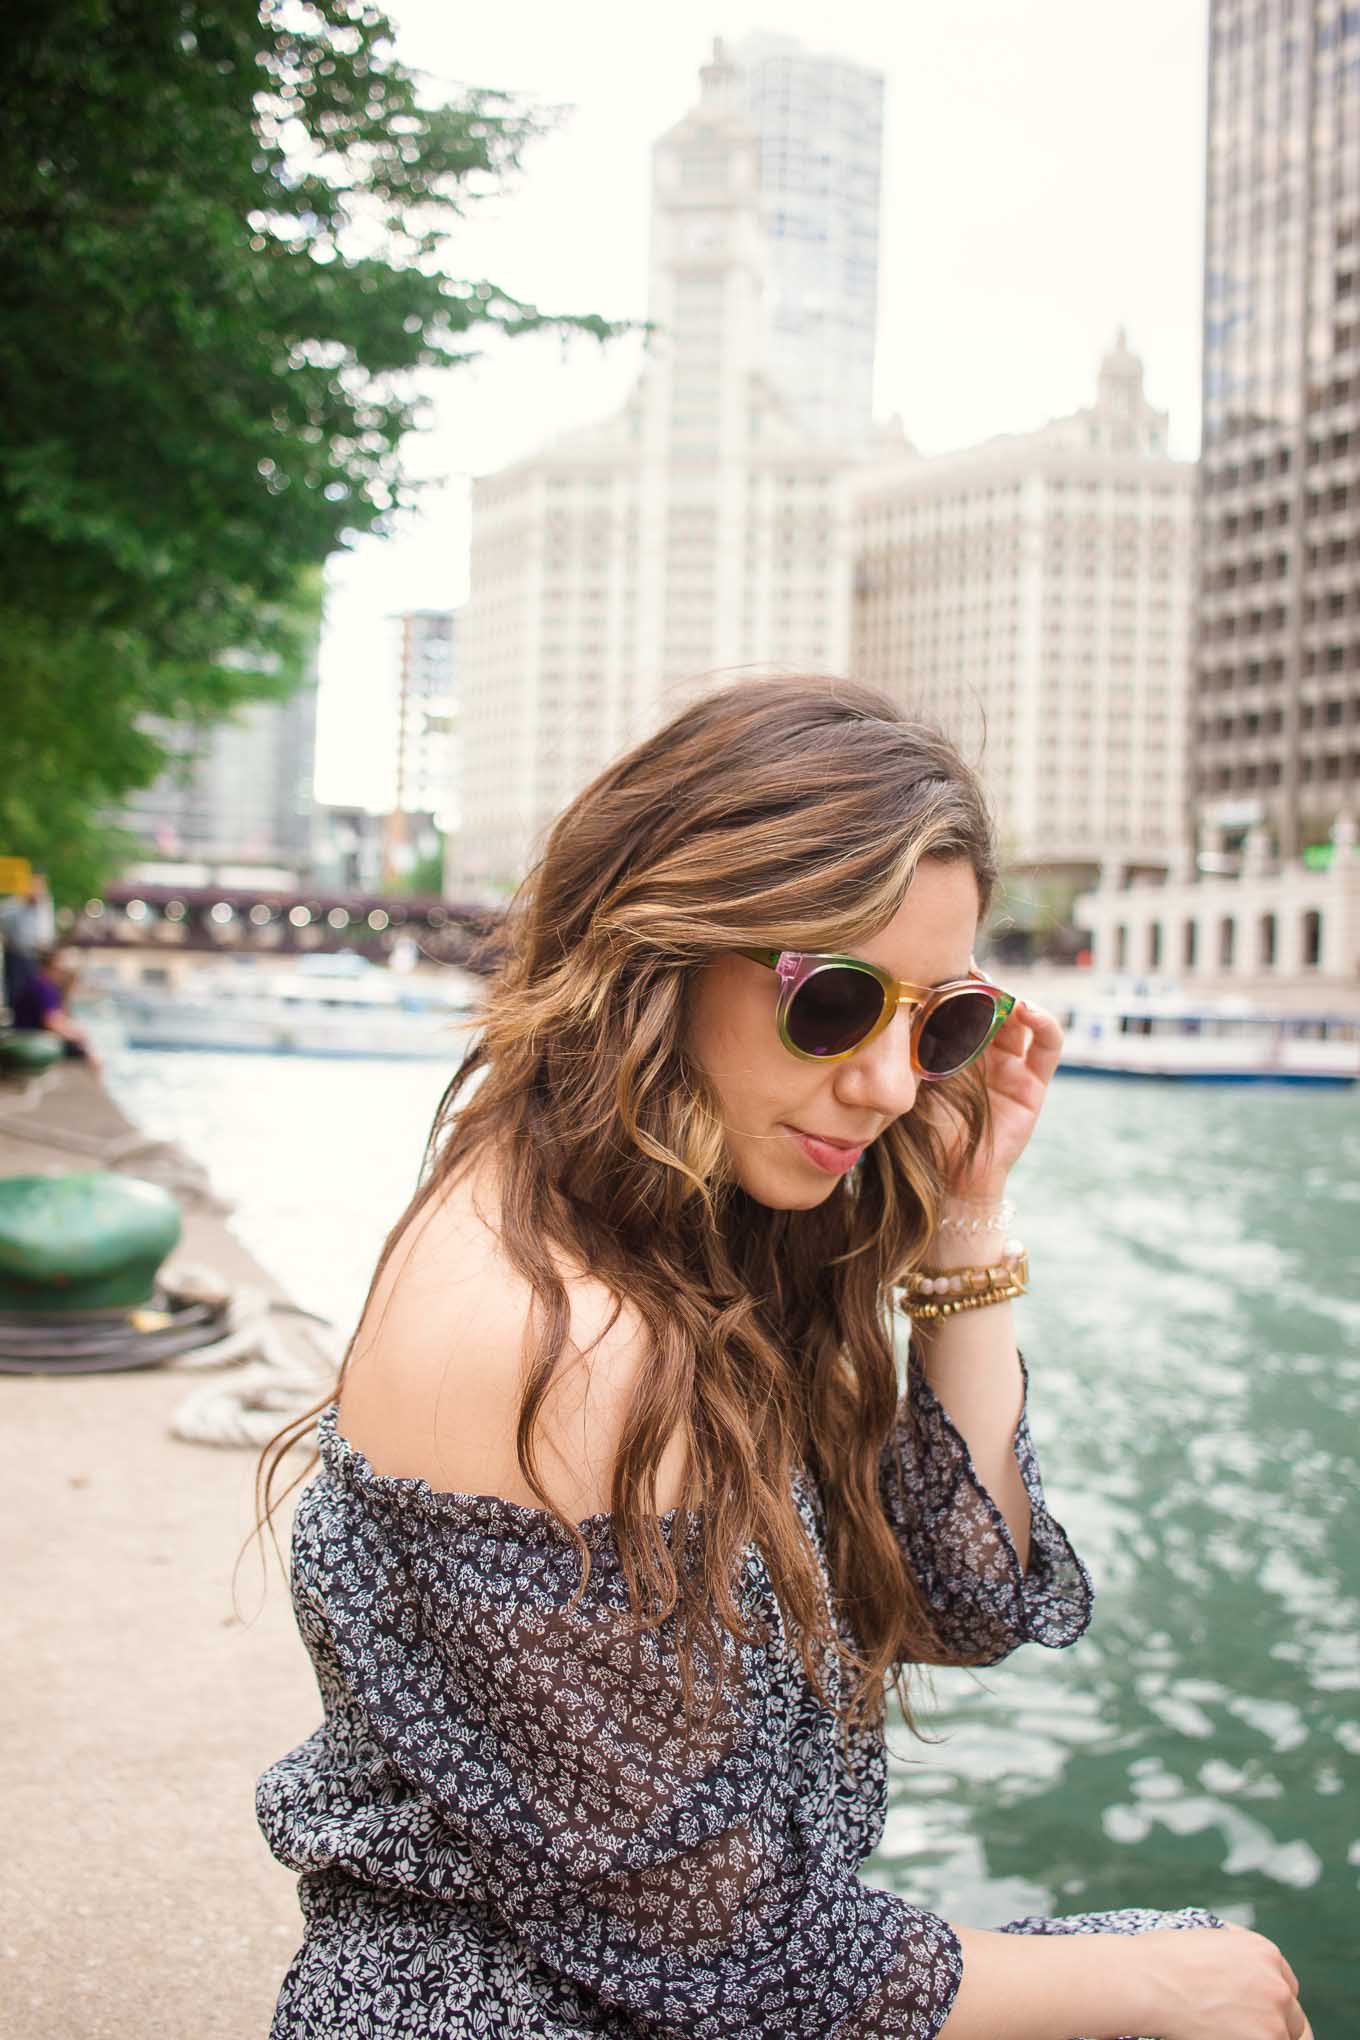 The Perfect Summer Dress & On Mondays We Link Up (#68) featured by popular Chicago style blogger, Glass of Glam